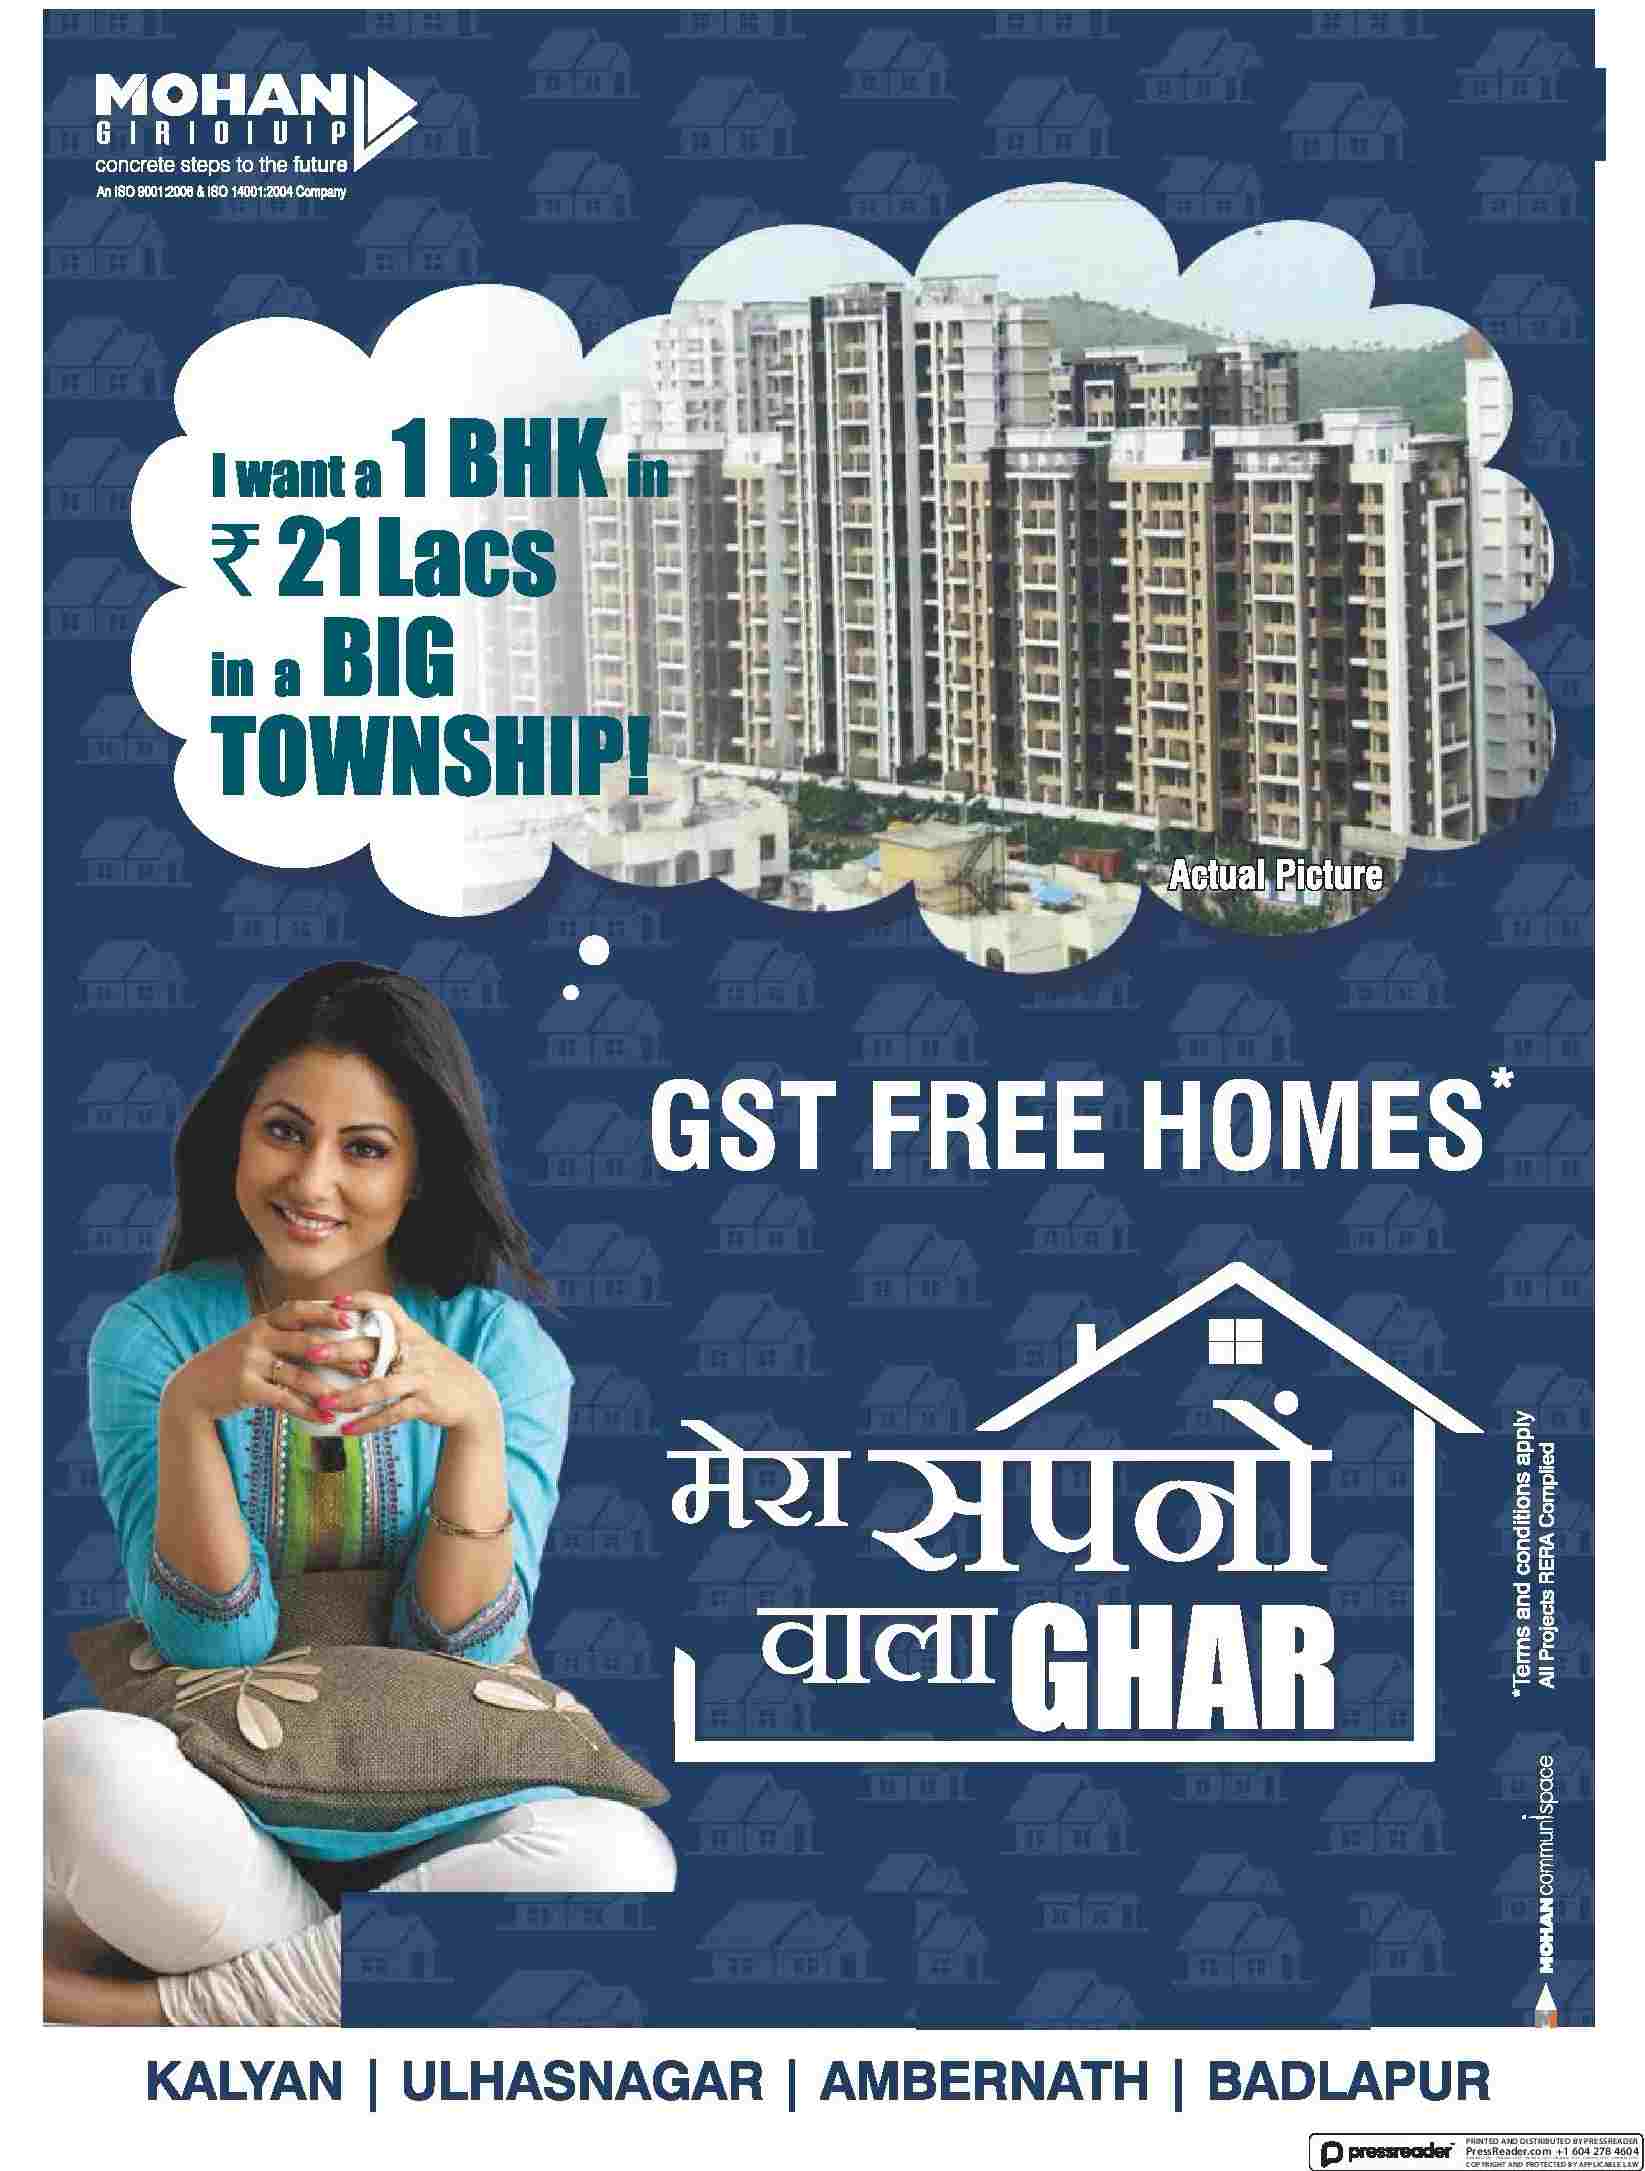 Invest in Mohan properties in Mumbai & live in GST free homes